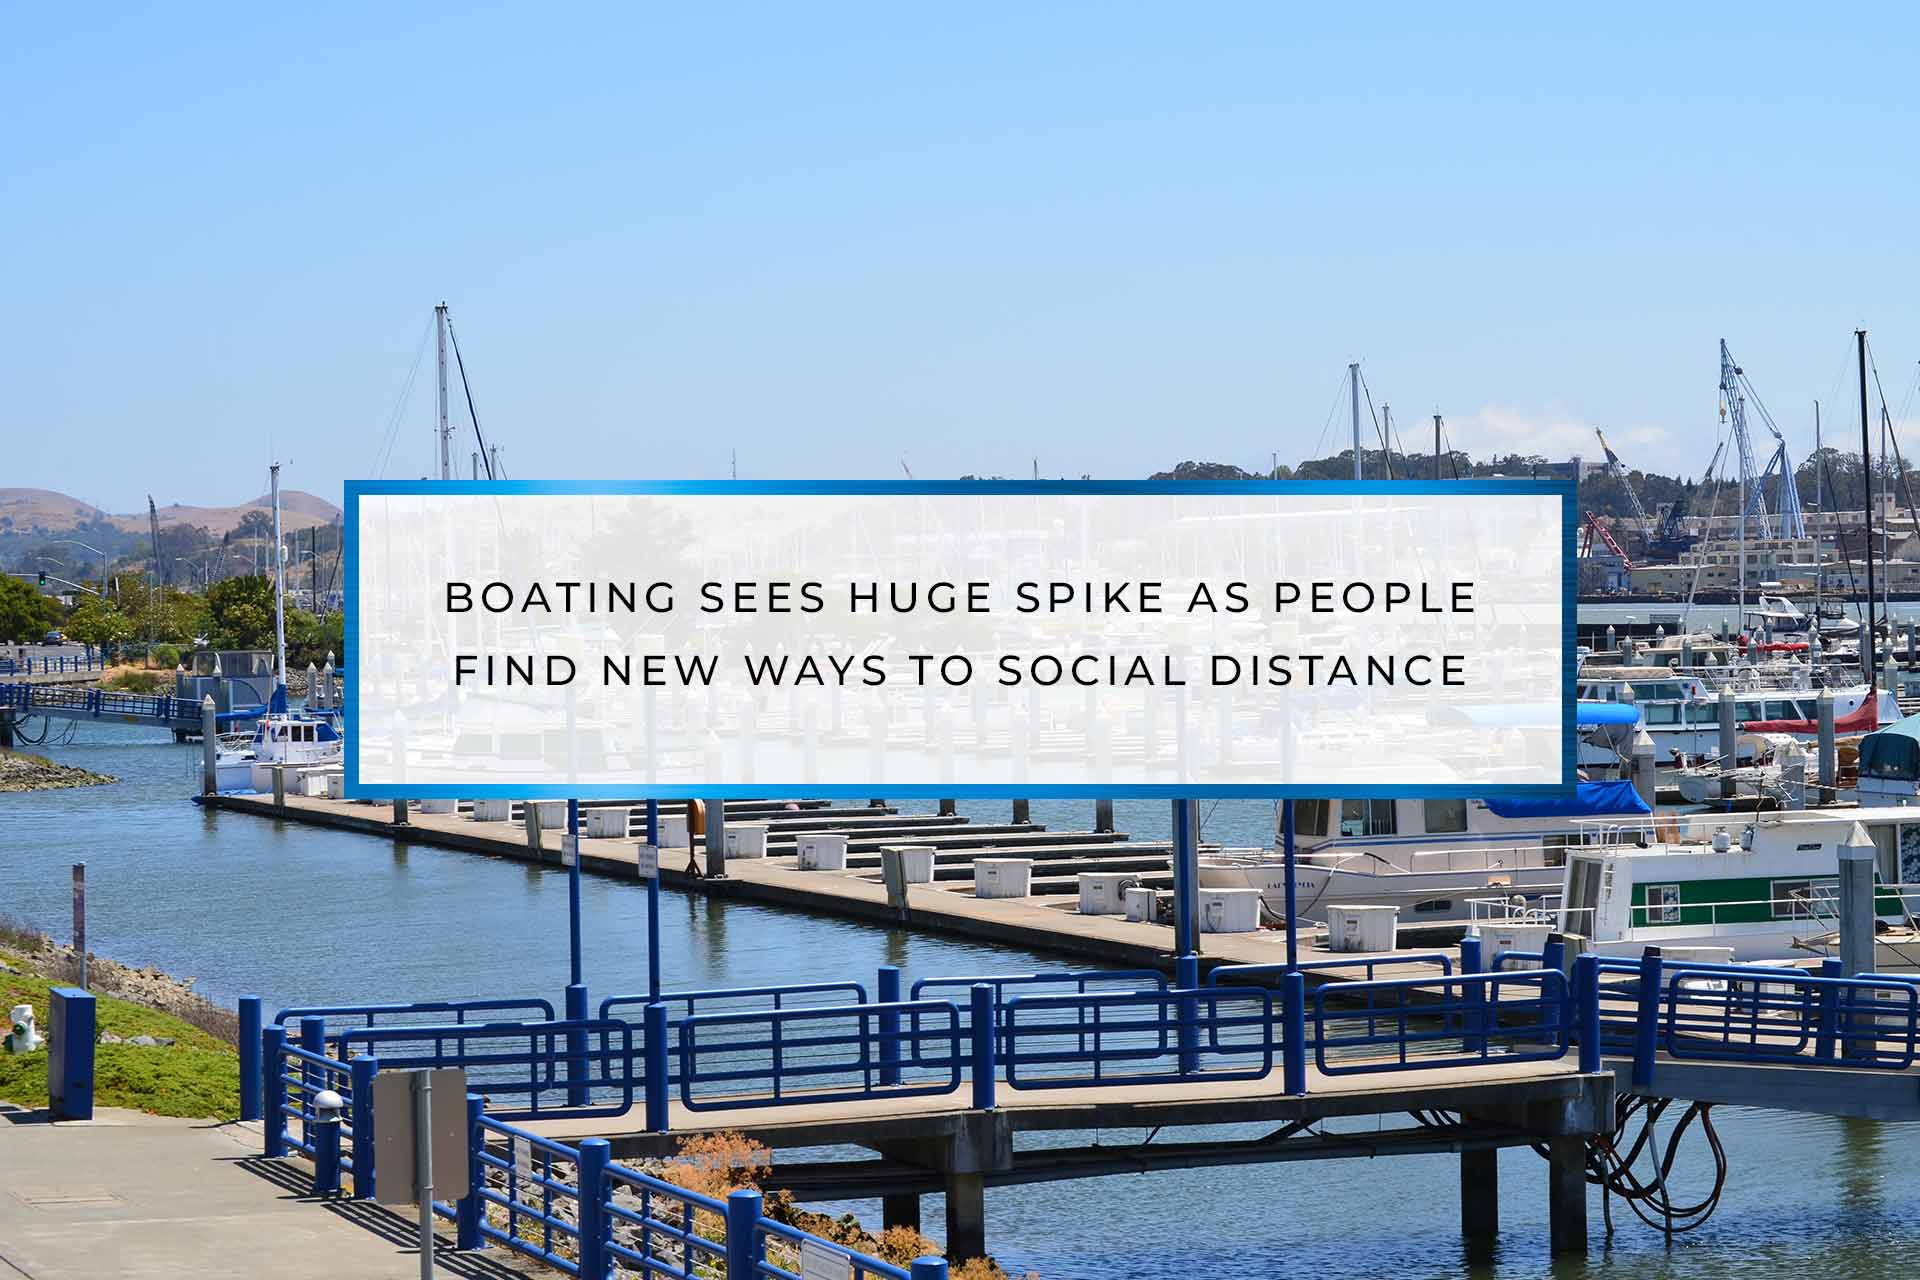 BOATING SEES HUGE SPIKE AS PEOPLE FIND NEW WAYS TO SOCIAL DISTANCE